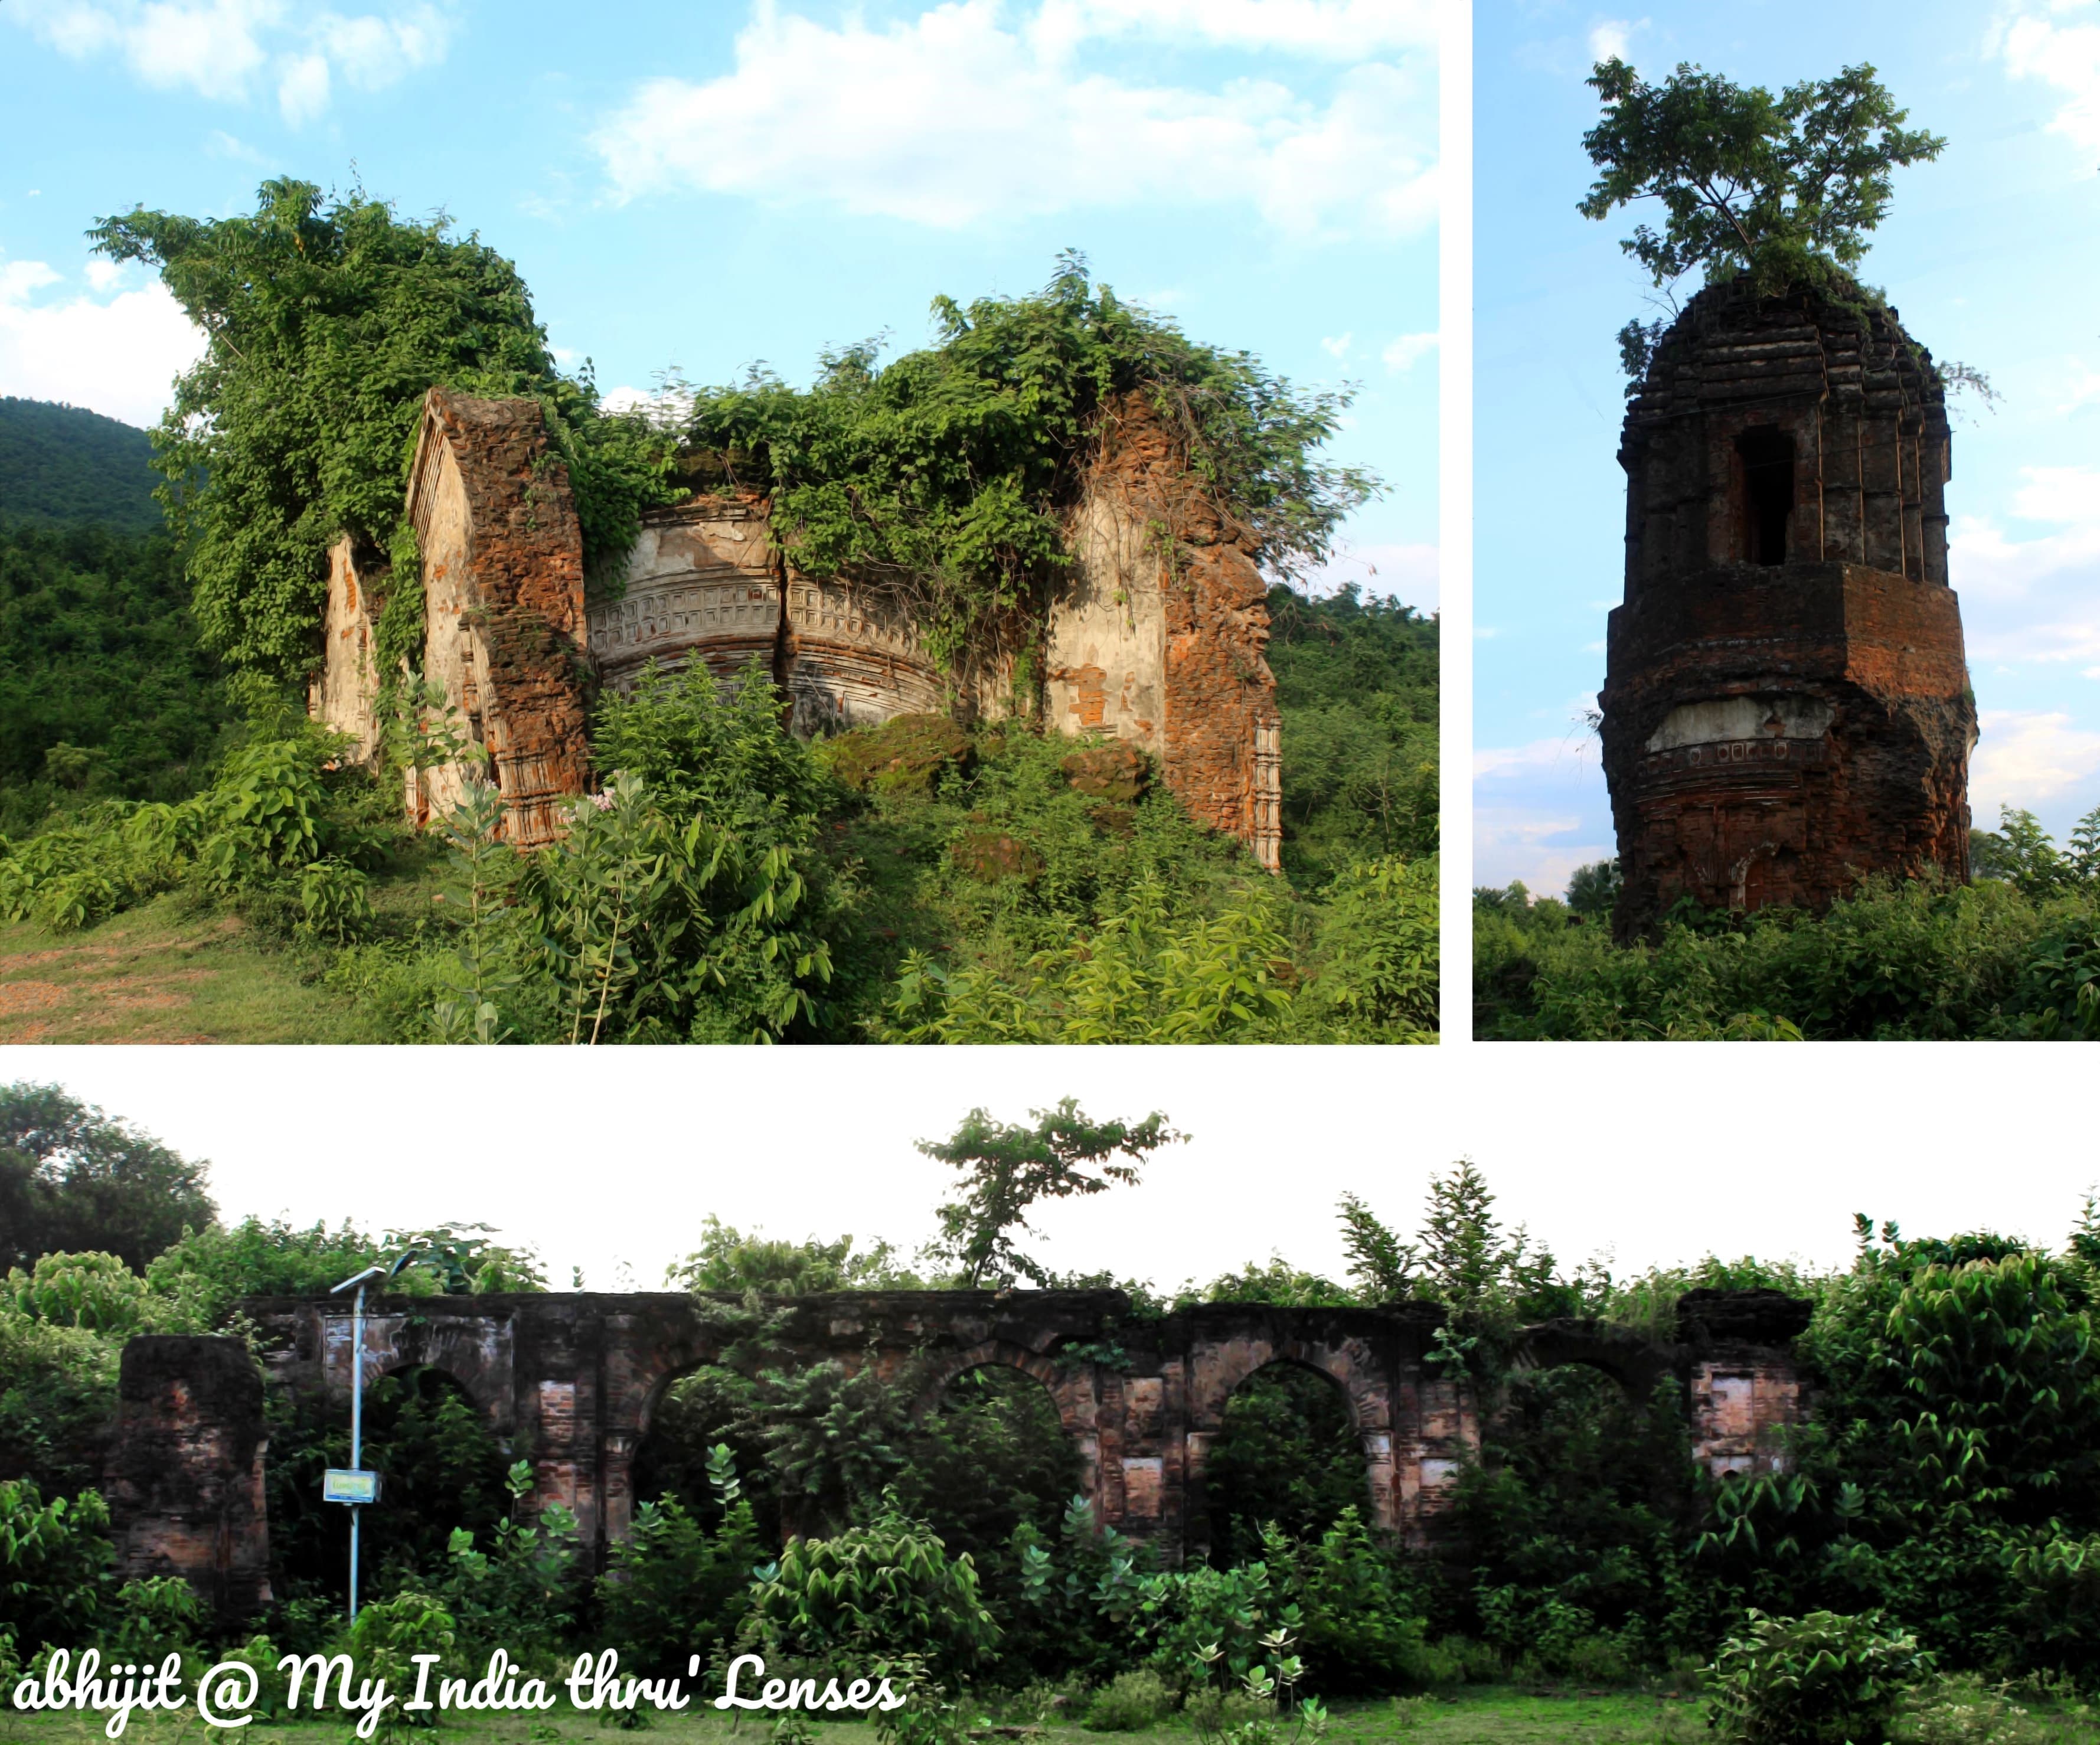 Ruins of the Fort. Top Left: A completely destroyed Temple. Top Right: A Watch Tower. Bottom: Palace Walls